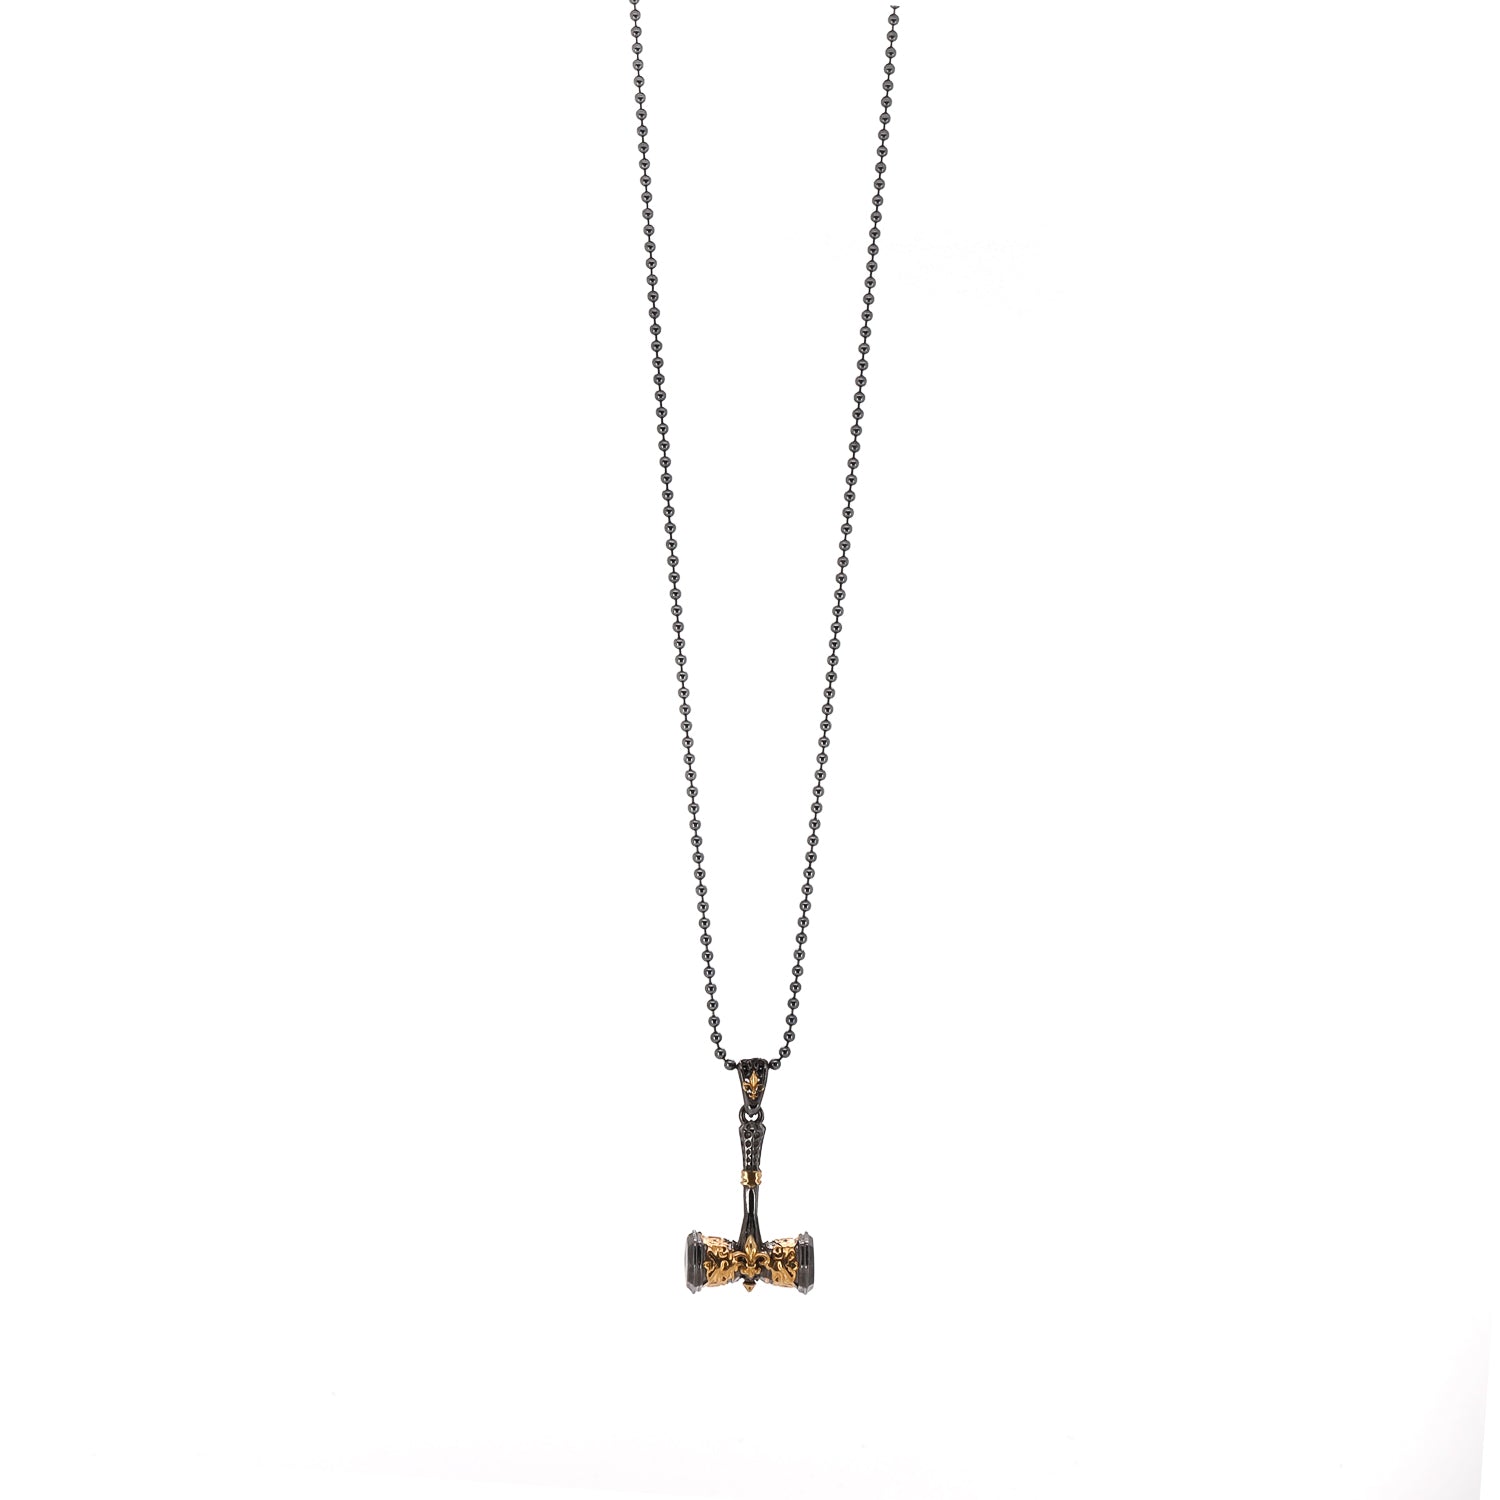 Elegant and rugged Sterling Silver & Gold Hammer Pendant Necklace, perfect for adding a unique touch to any outfit